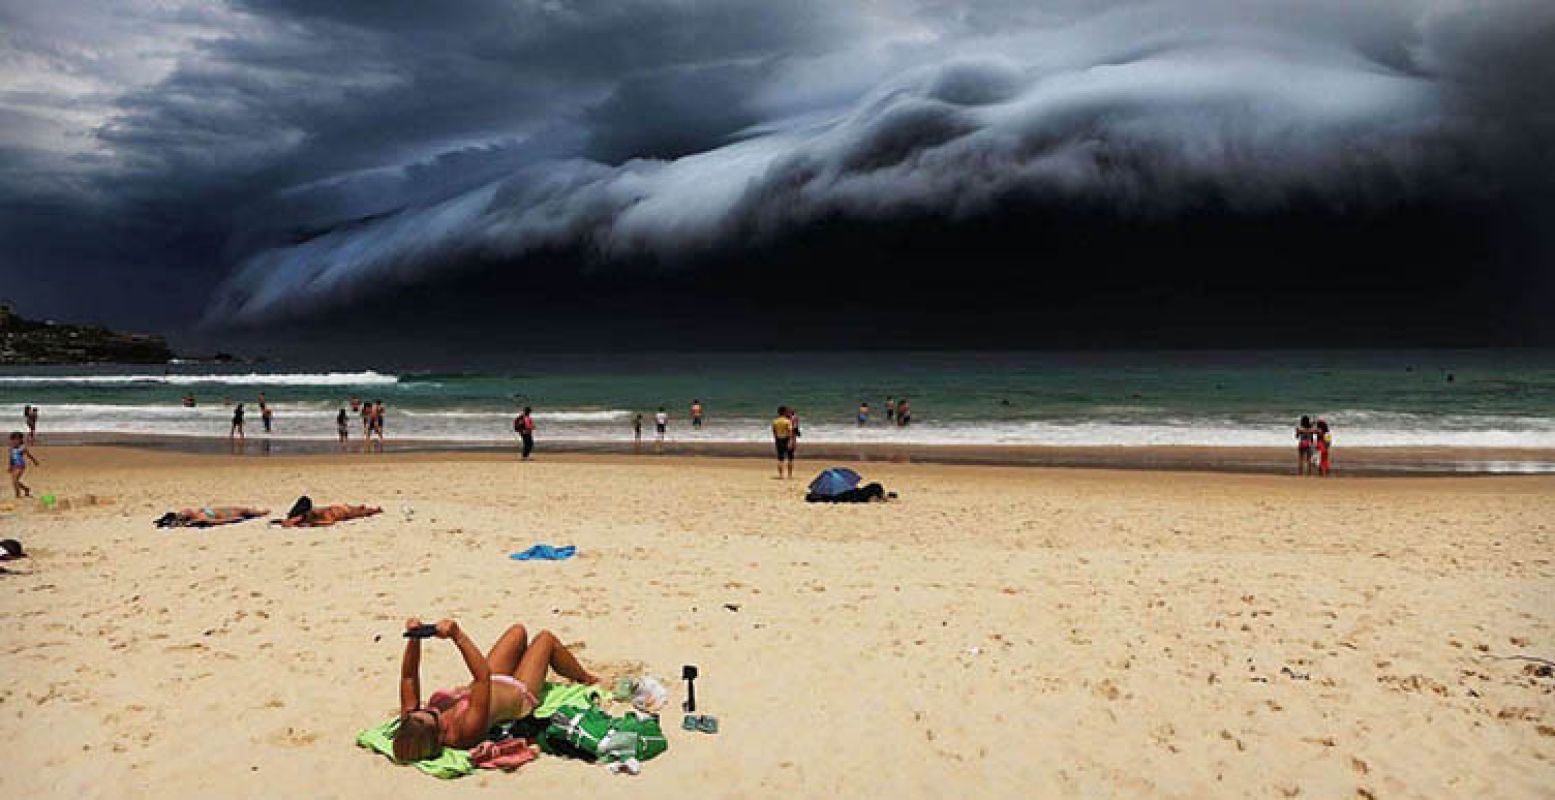 Nature, 1st prize singles. Rohan Kelly, Australia, 2015, Daily Telegraph, Storm Front on Bondi Beach. A massive 'cloud tsunami' looms over Sydney as a sunbather reads, oblivious to the approaching cloud on Bondi Beach, Sydney, Australia on 06 November 2015.